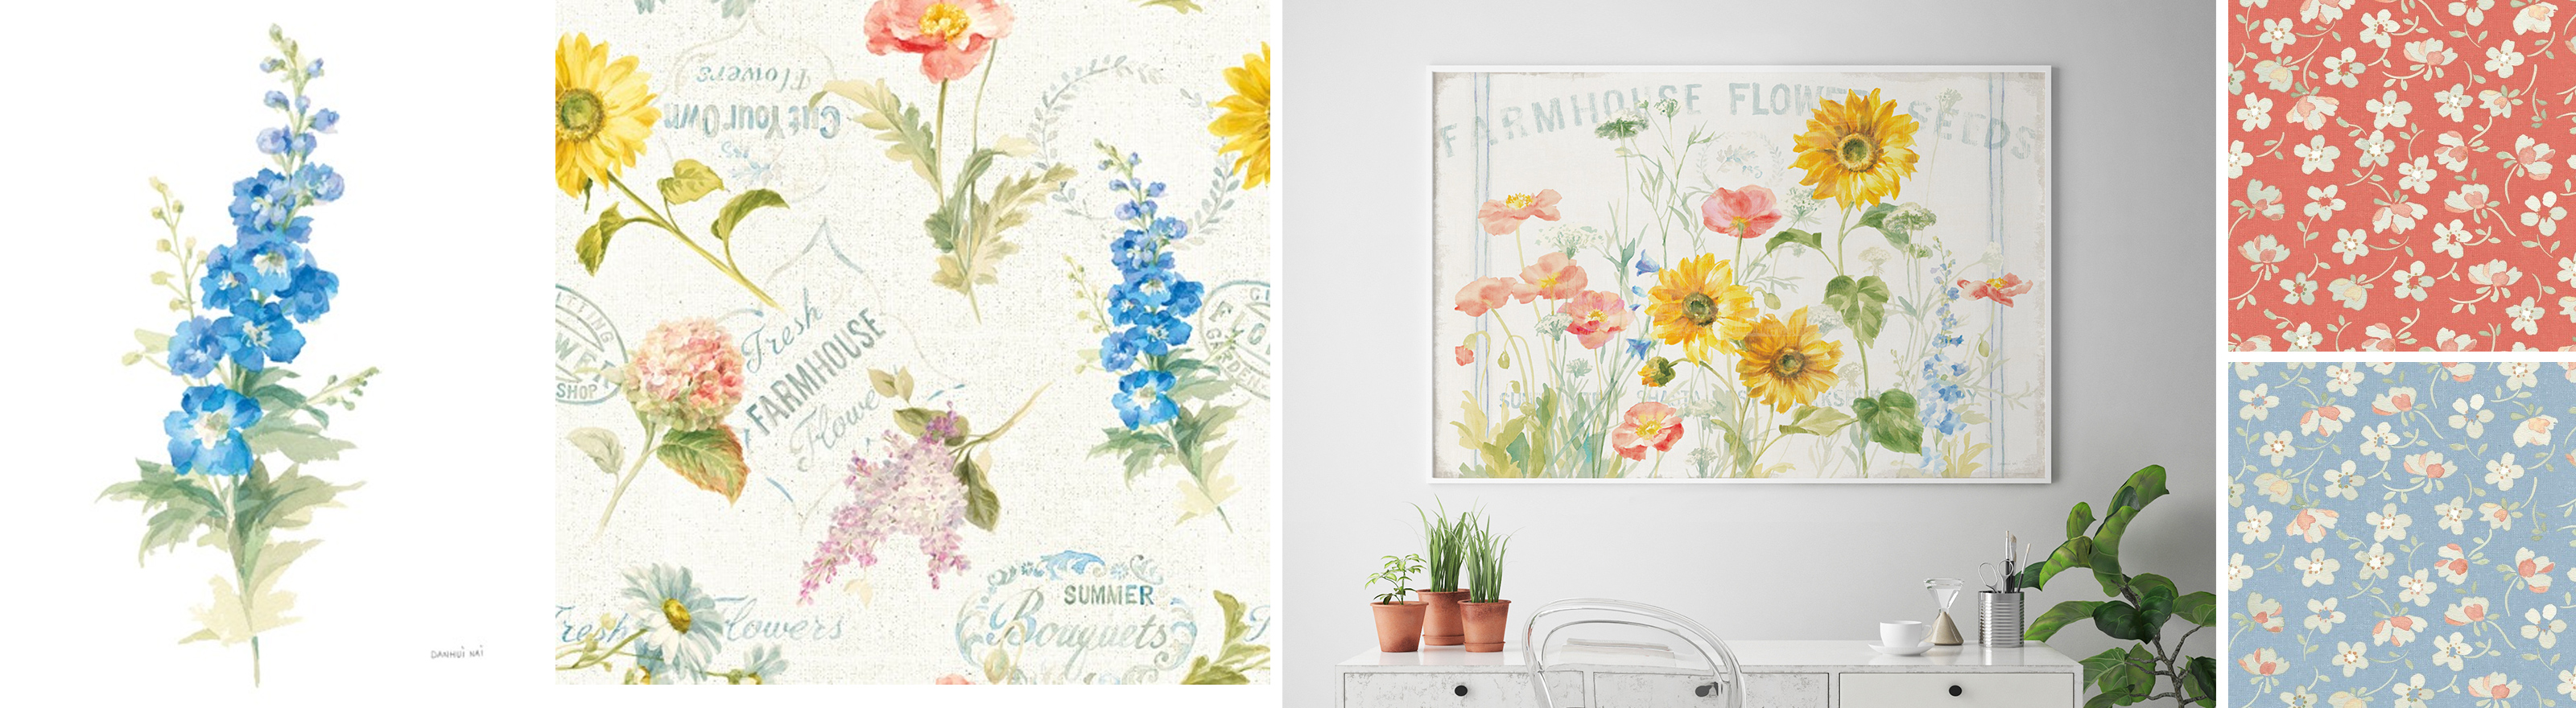 Spring Inspired Art and Patterns